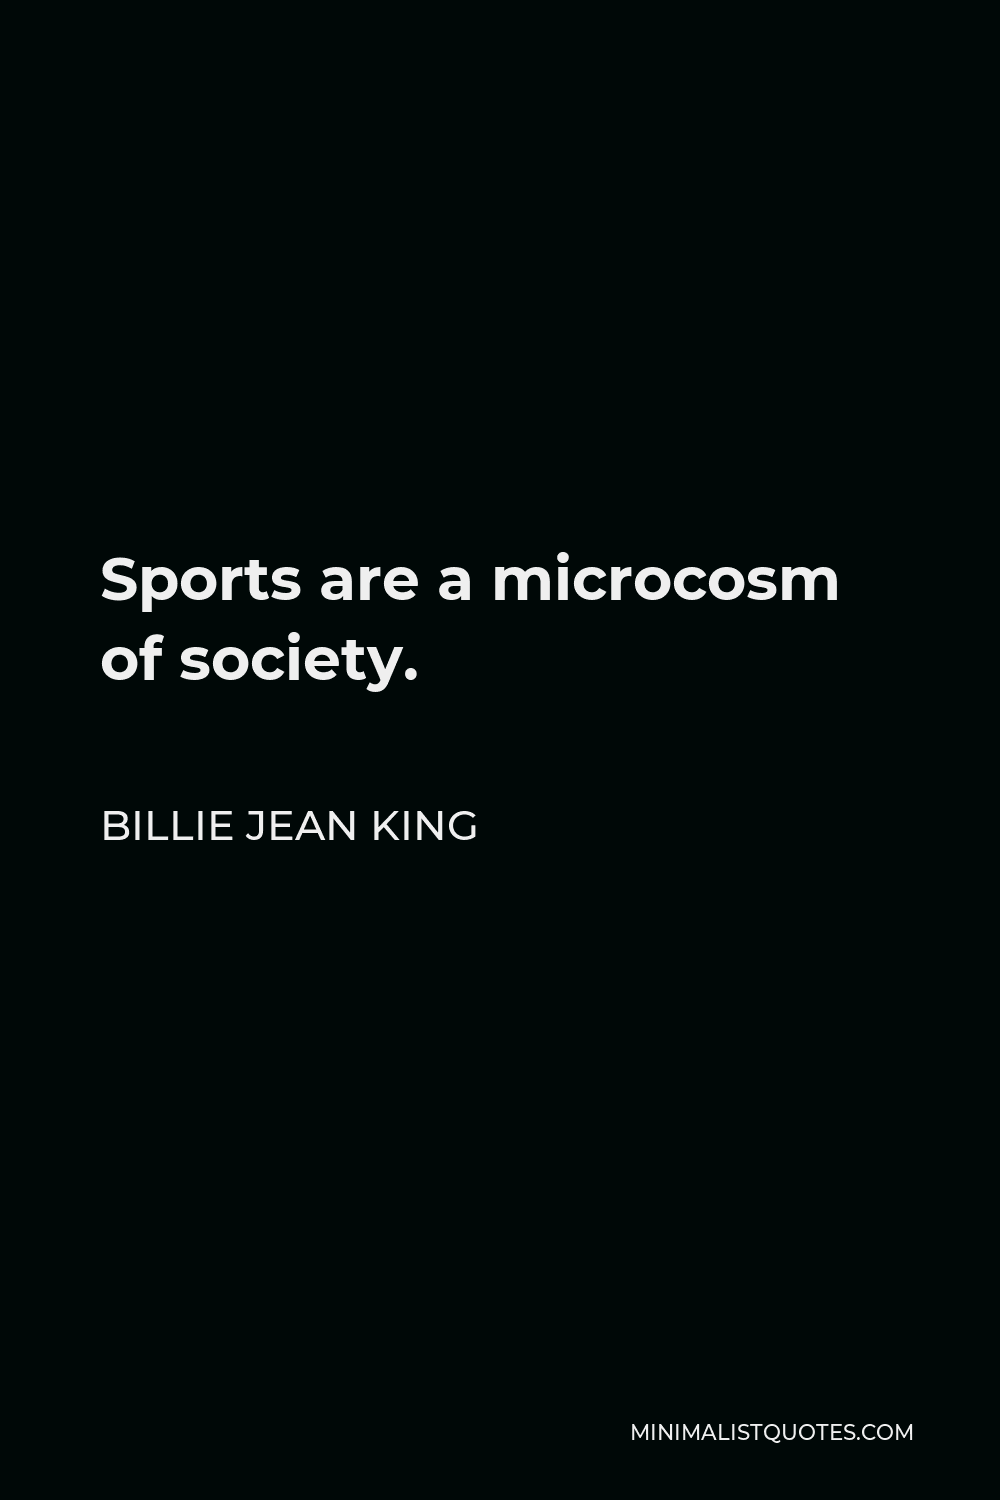 Billie Jean King Quote - Sports are a microcosm of society.